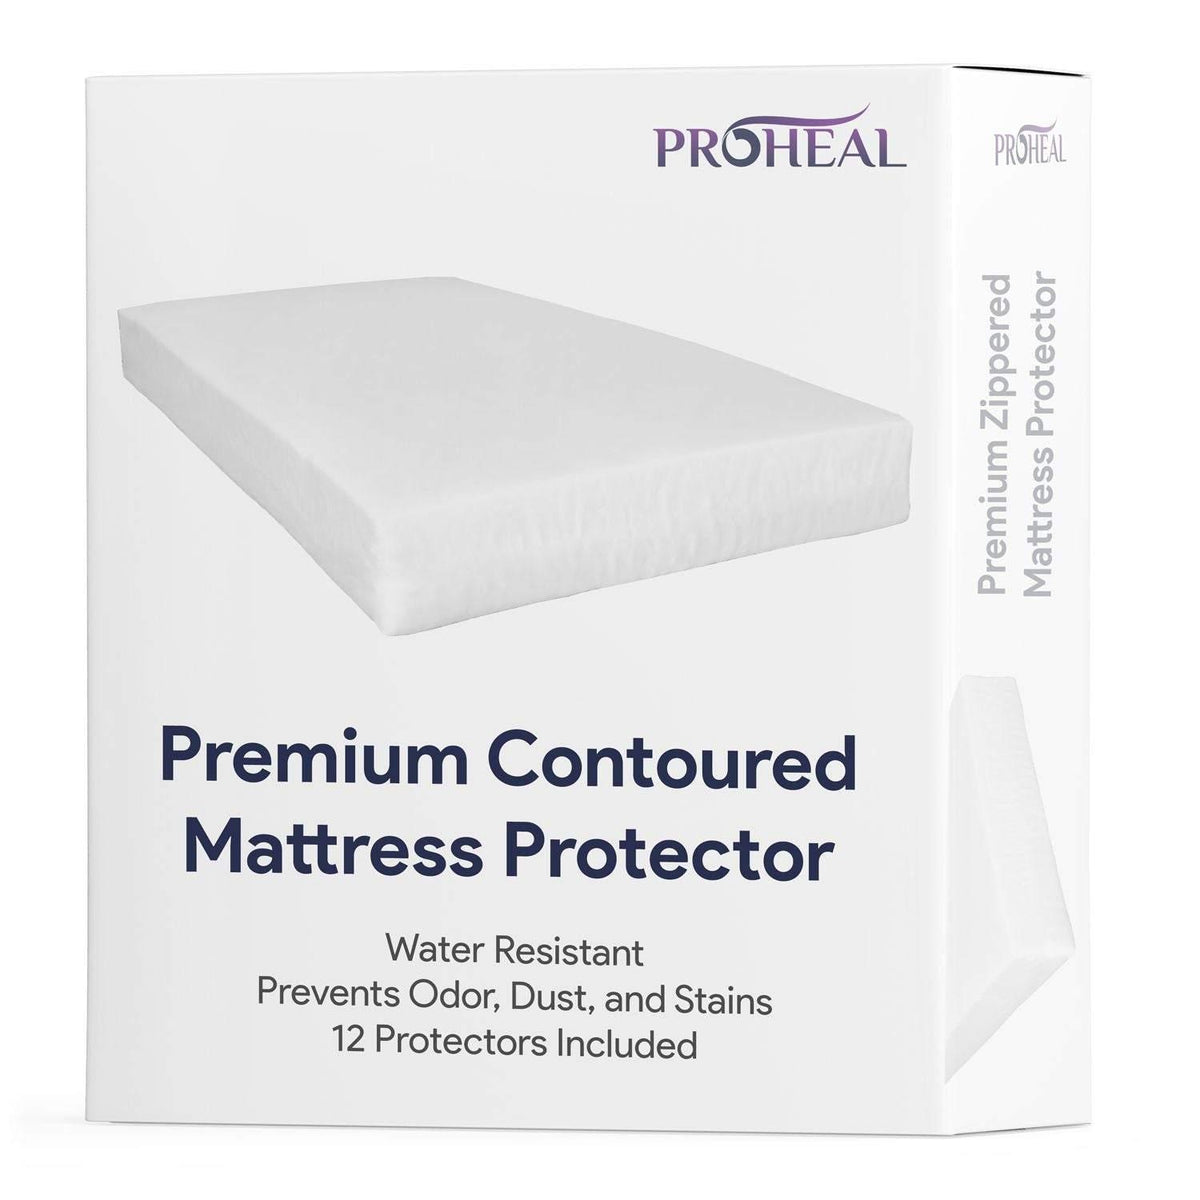 Proheal Hospital Bed Air Mattress Cover with Foam Rails - 48 x 80 x 6 x  9